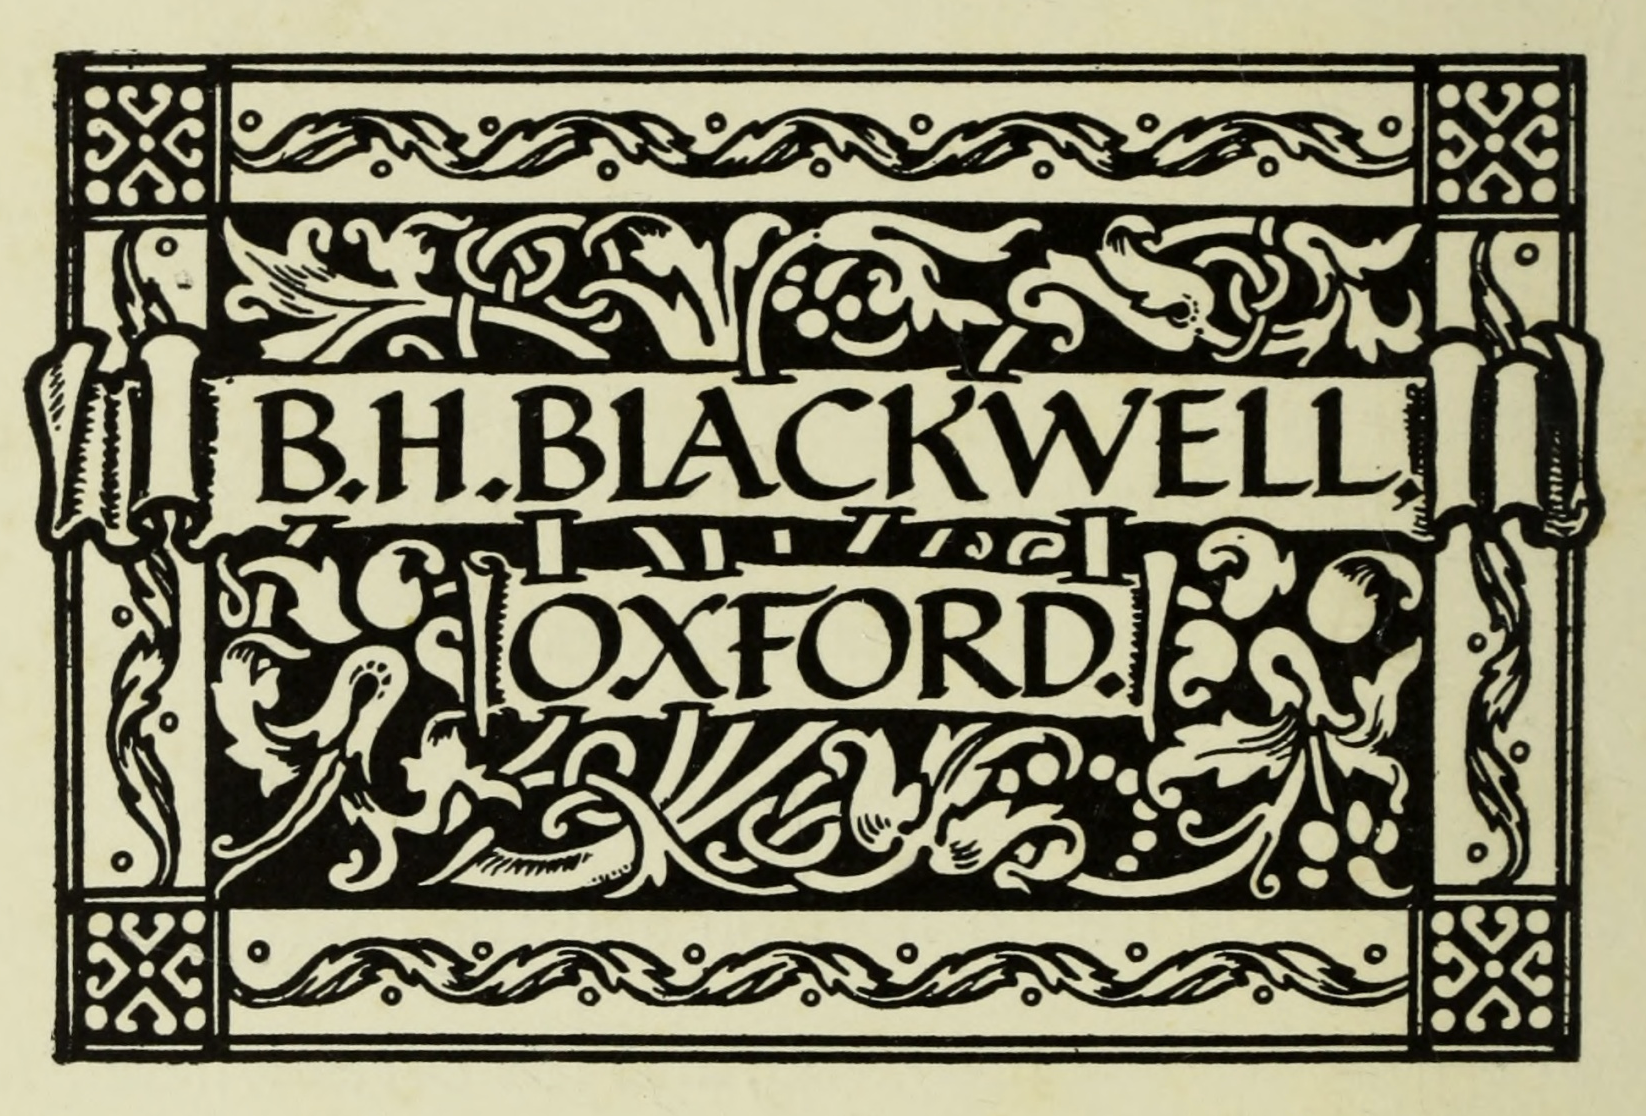 ornamented rectangle with B. H. Blackwell, Oxford.